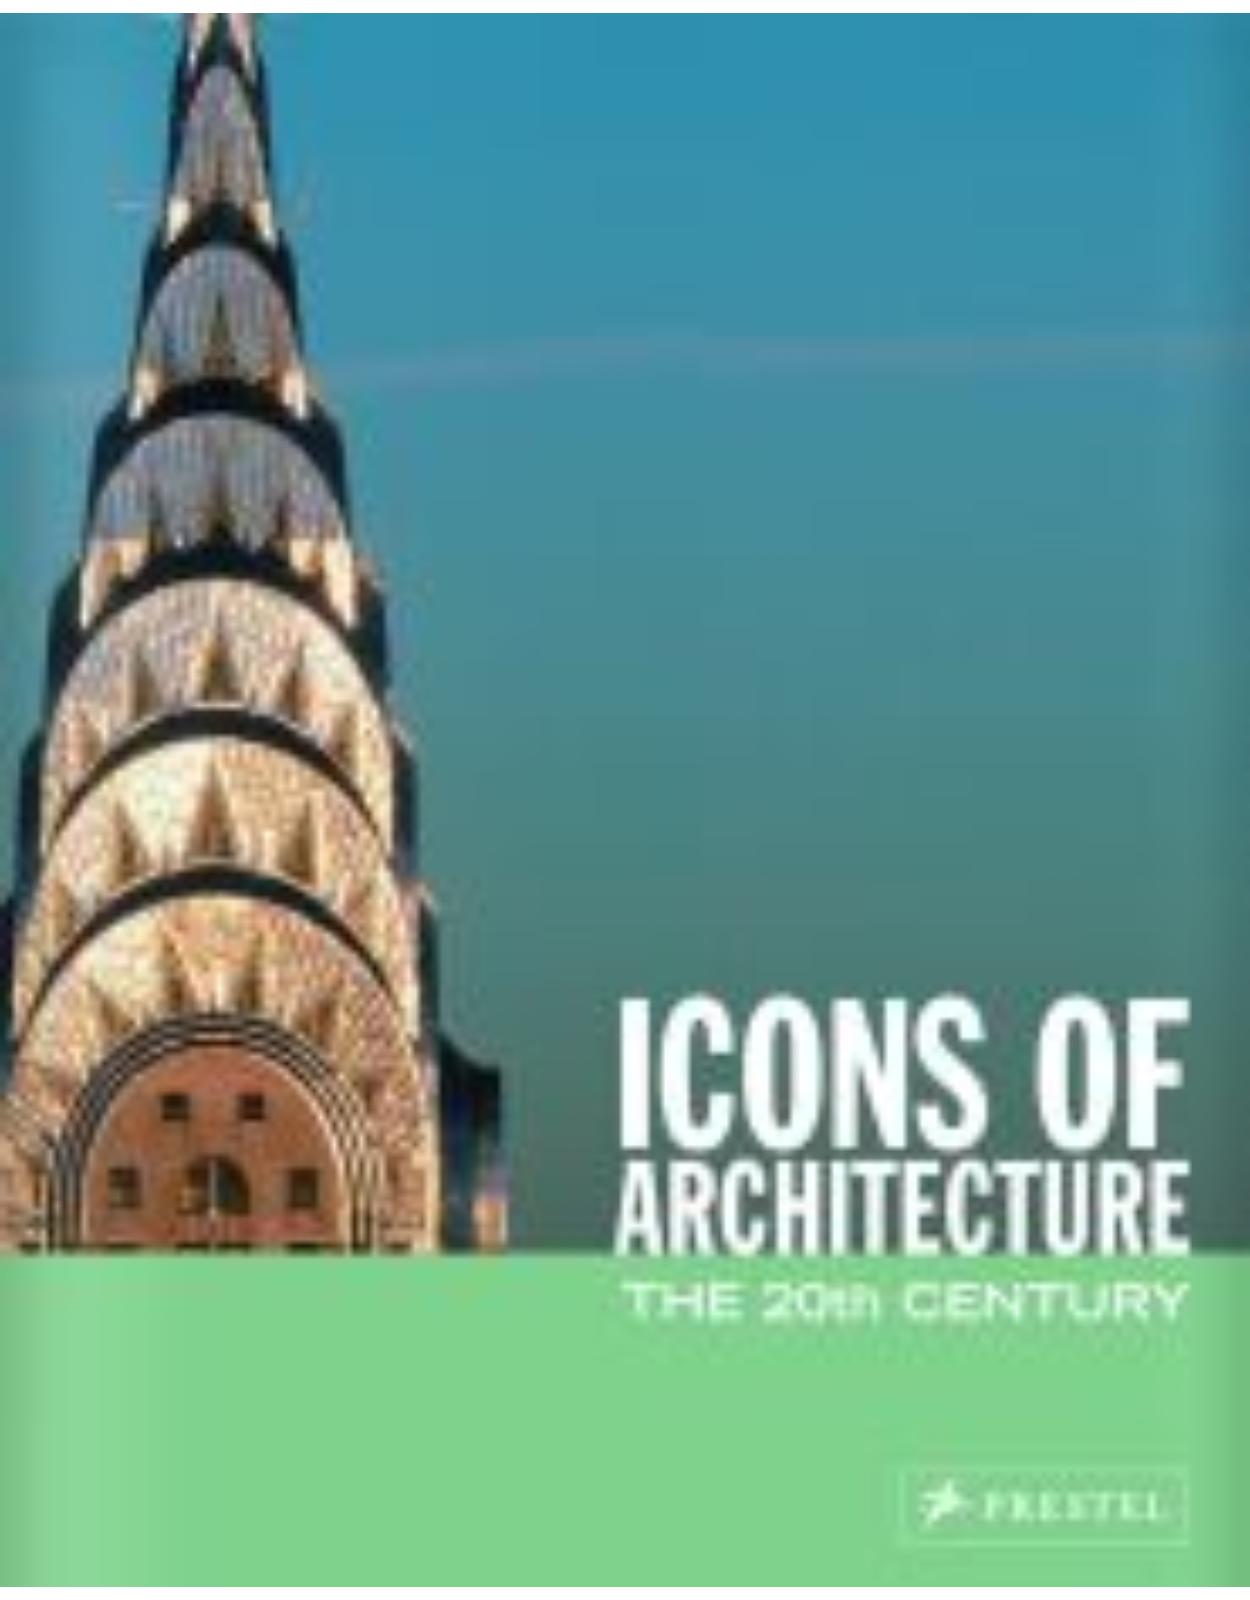 Icons of Architecture / The 20th Century